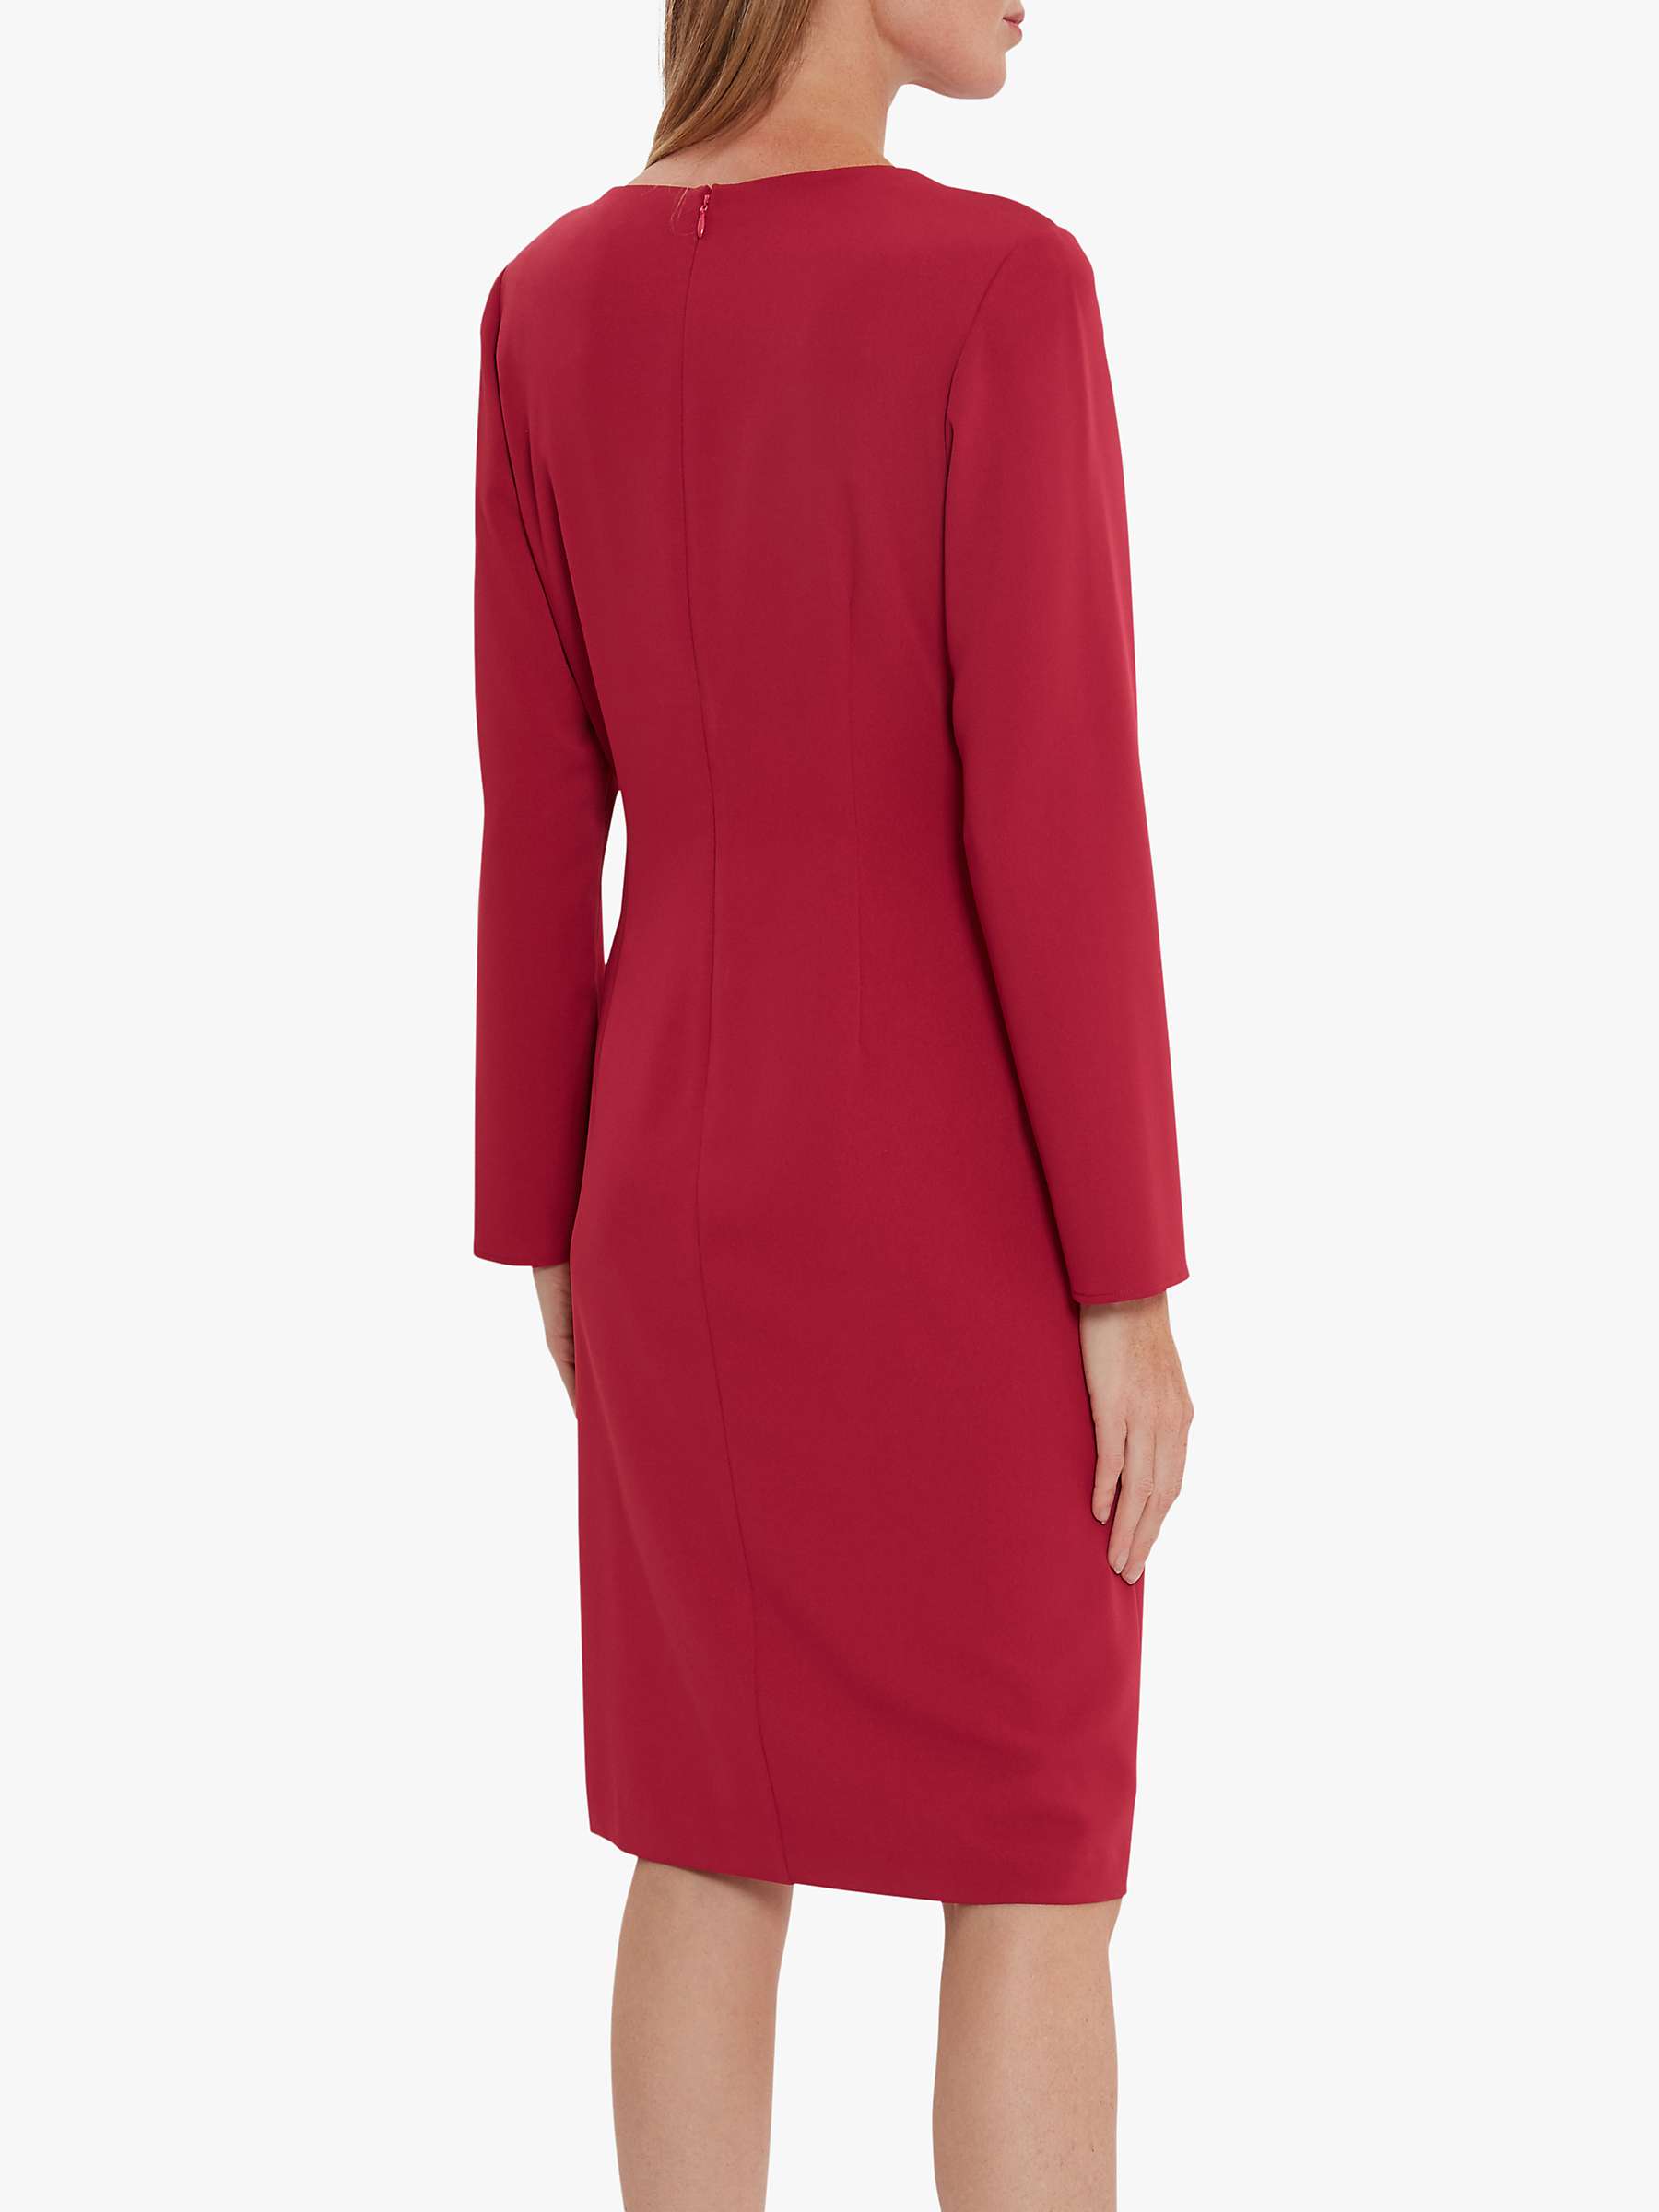 Buy Gina Bacconi Sedona Coat Dress With Brooch Online at johnlewis.com